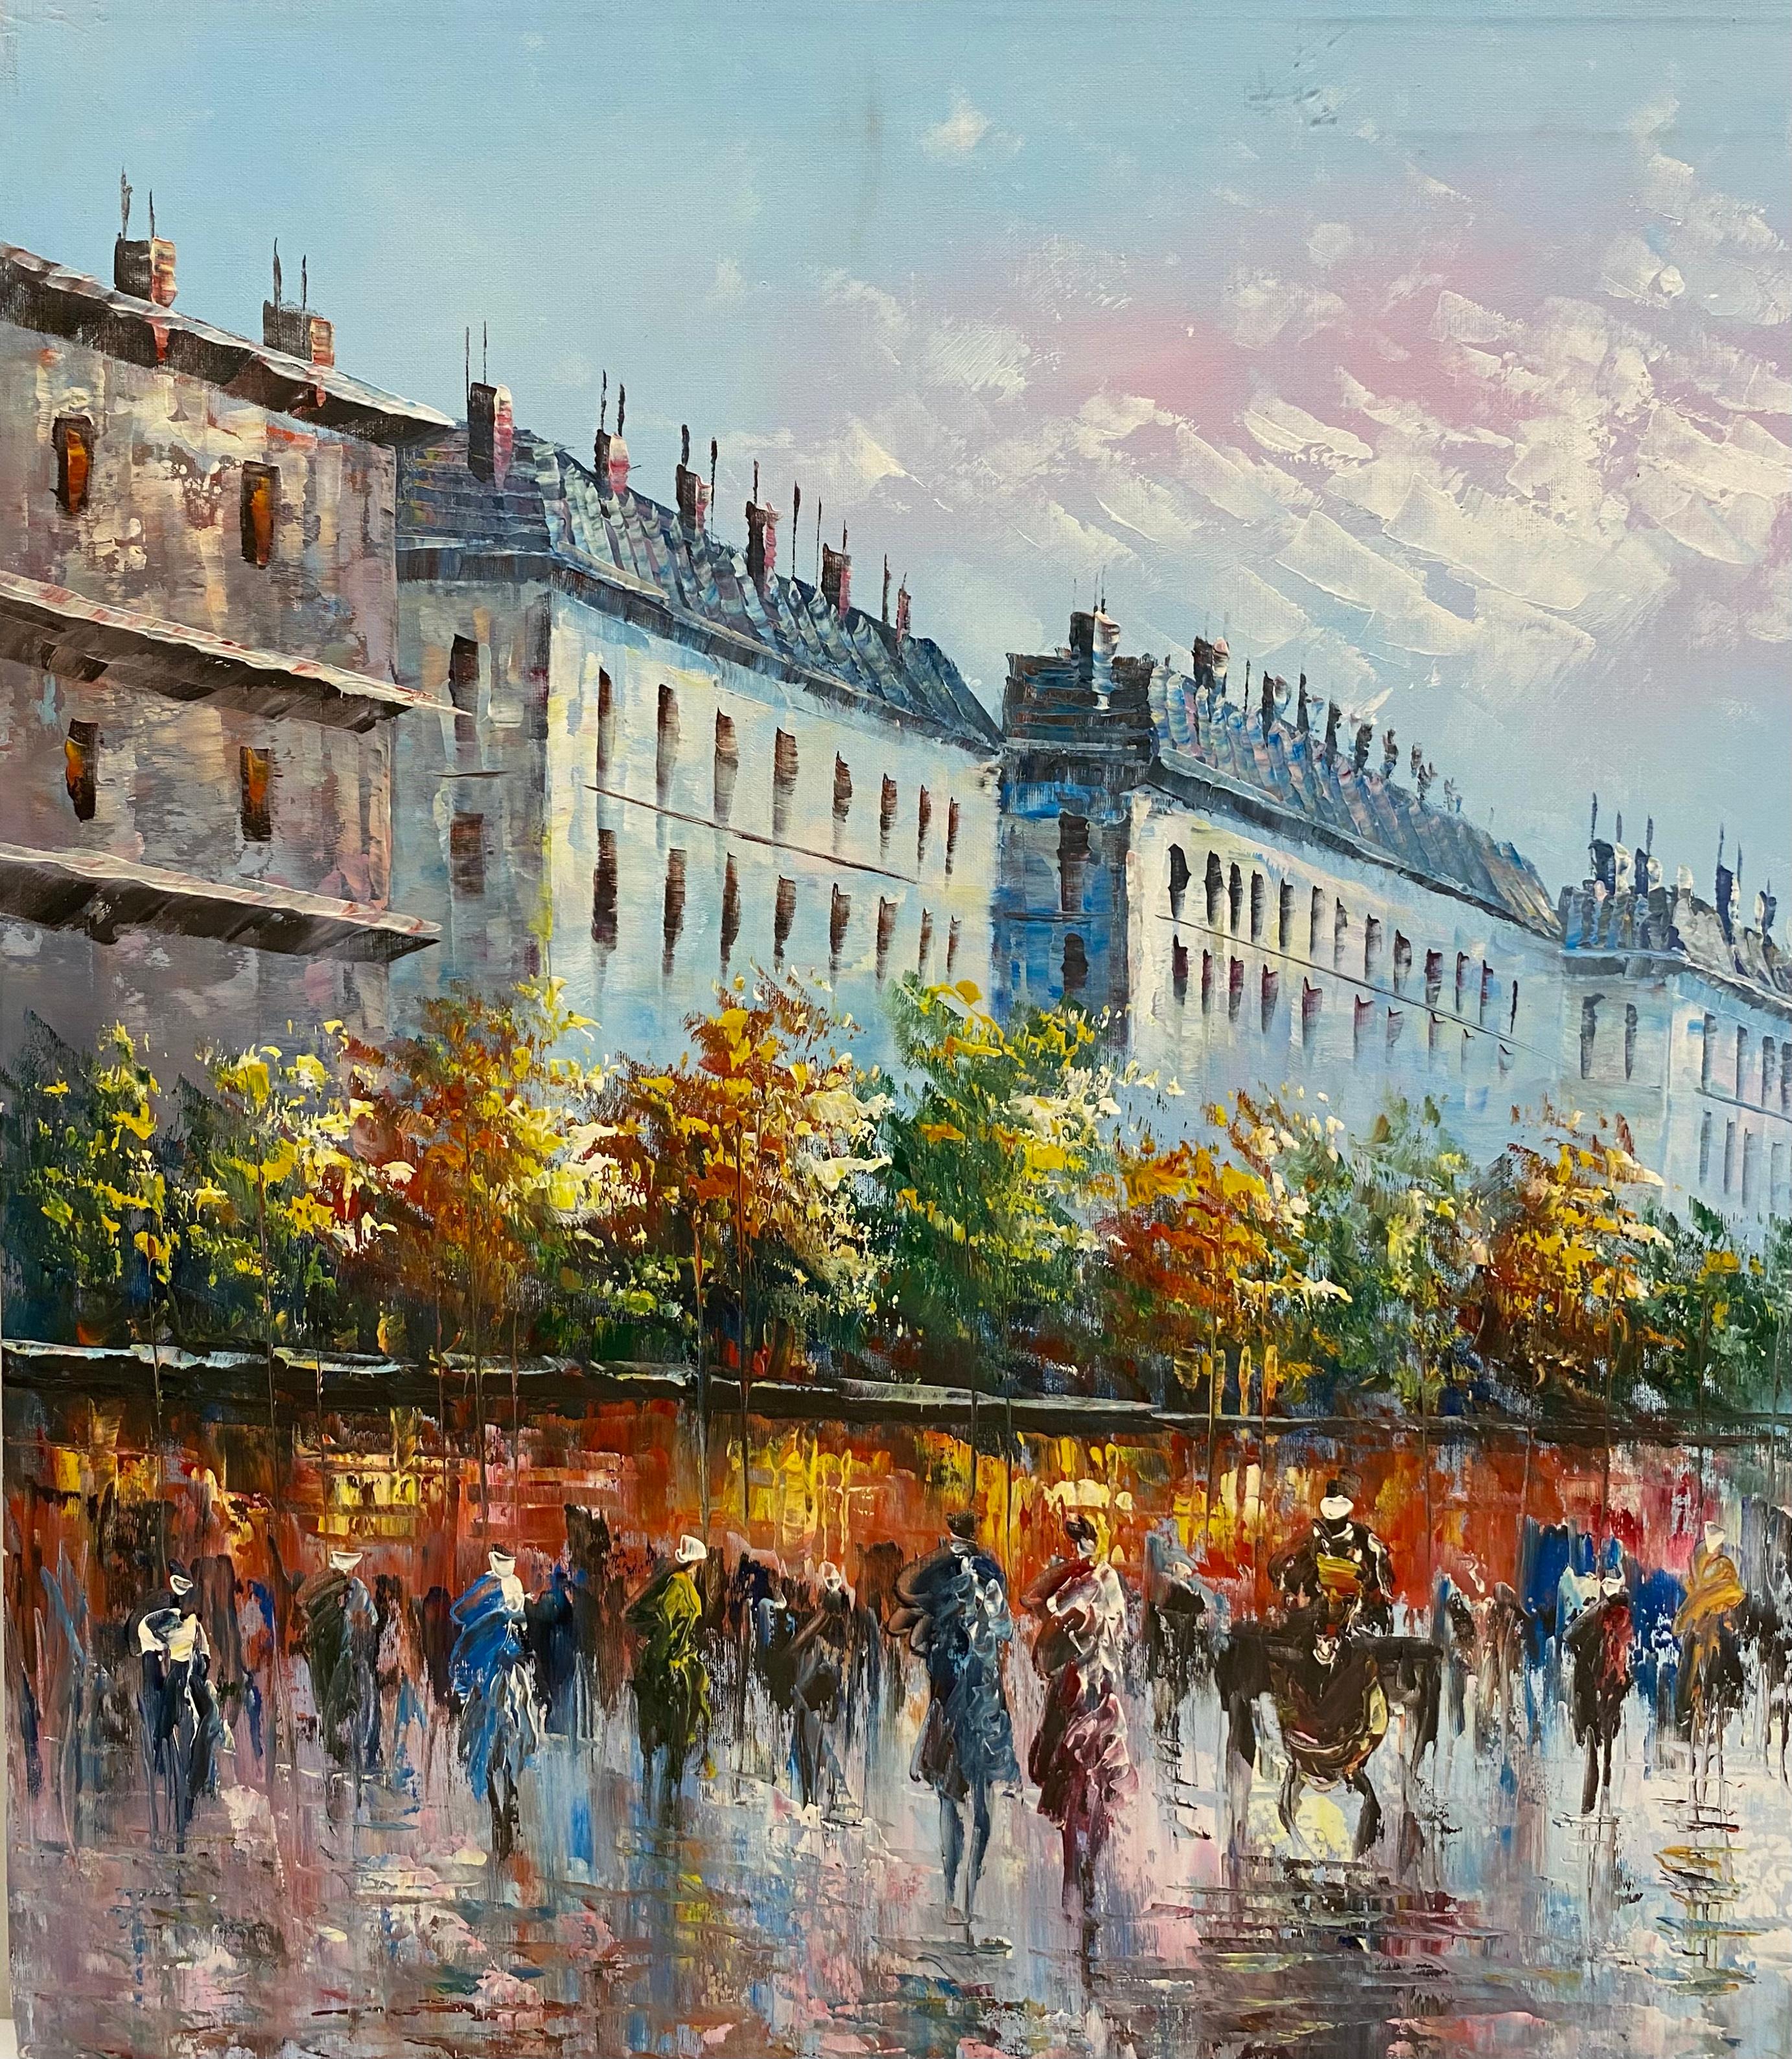 A beautiful oil on canvas painting of a street scene in Paris, France. This painting perfectly depicts life in the 